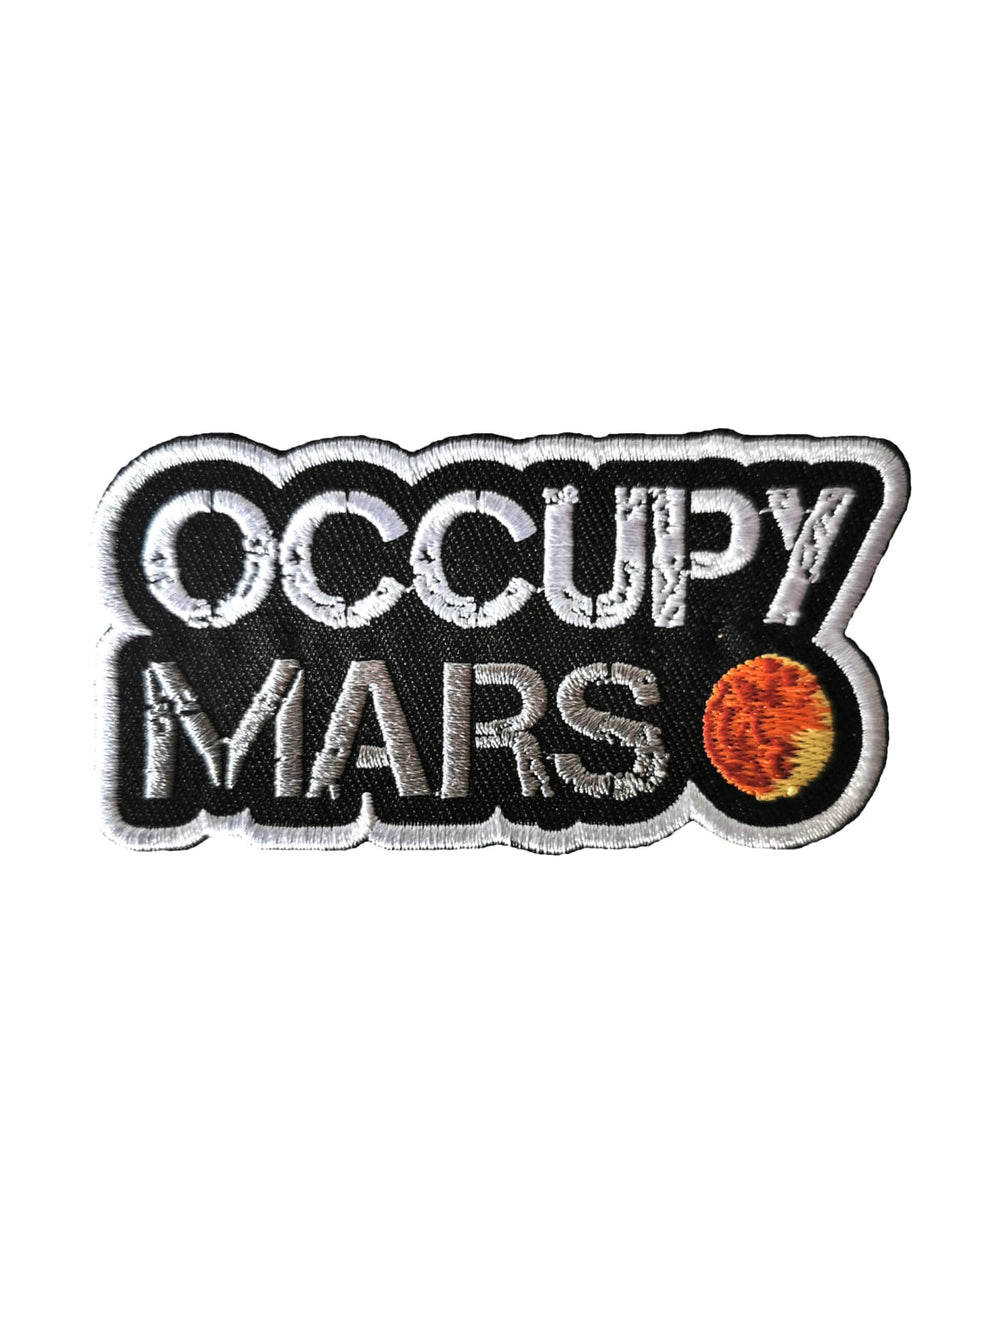 Occupy Mars Patch - SpaceX Fanstore